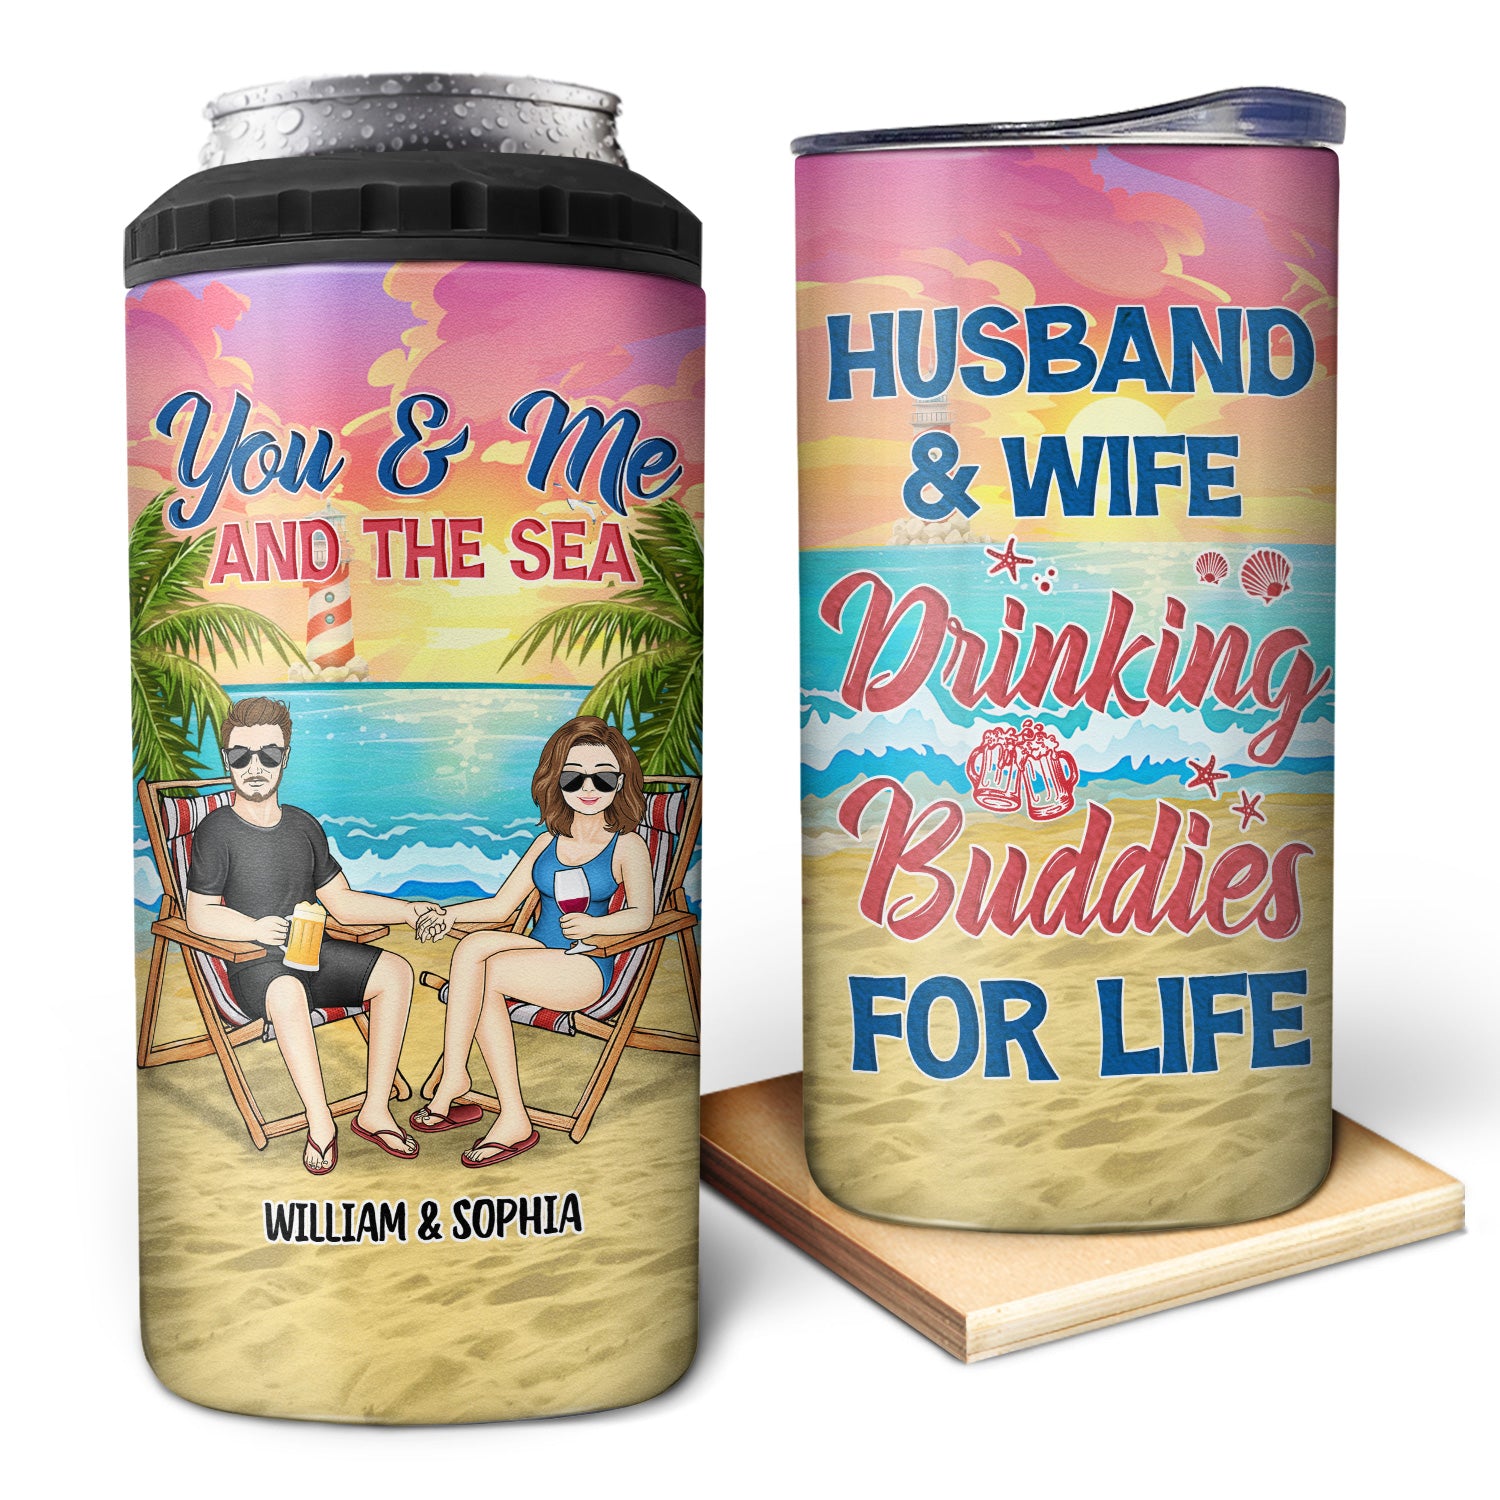 Husband And Wife Drinking Buddies For Life - Gift For Couples, Beach, Travel Lovers - Personalized Custom 4 In 1 Can Cooler Tumbler